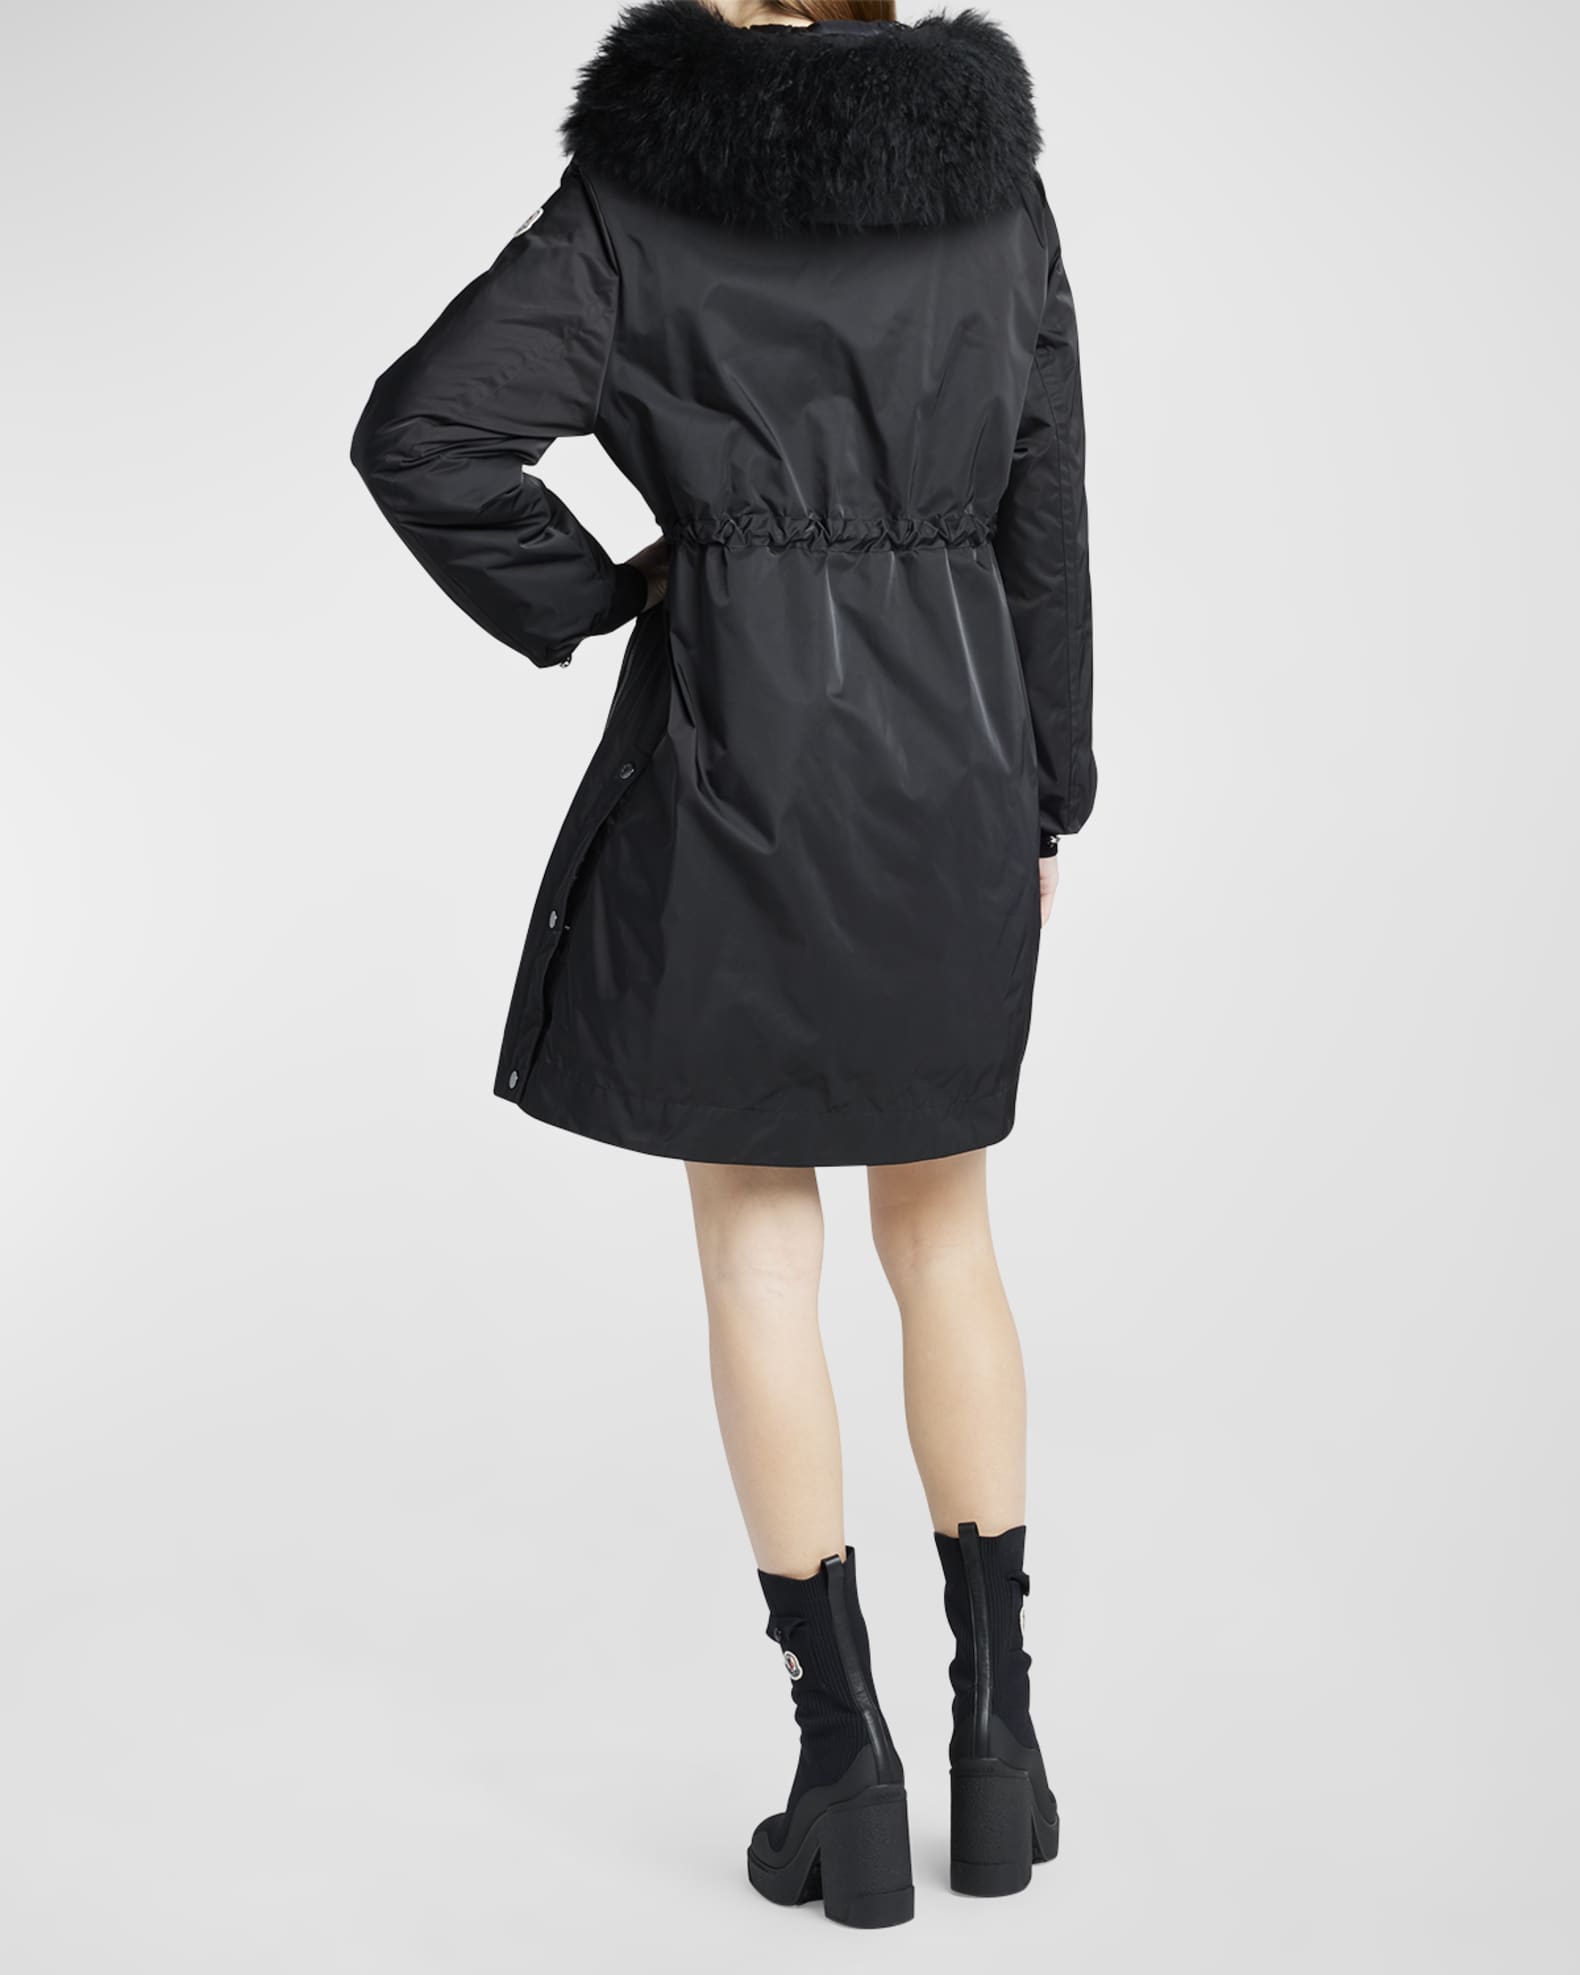 Moncler Durbec Long Parka Jacket with Shearling Collar | Neiman Marcus